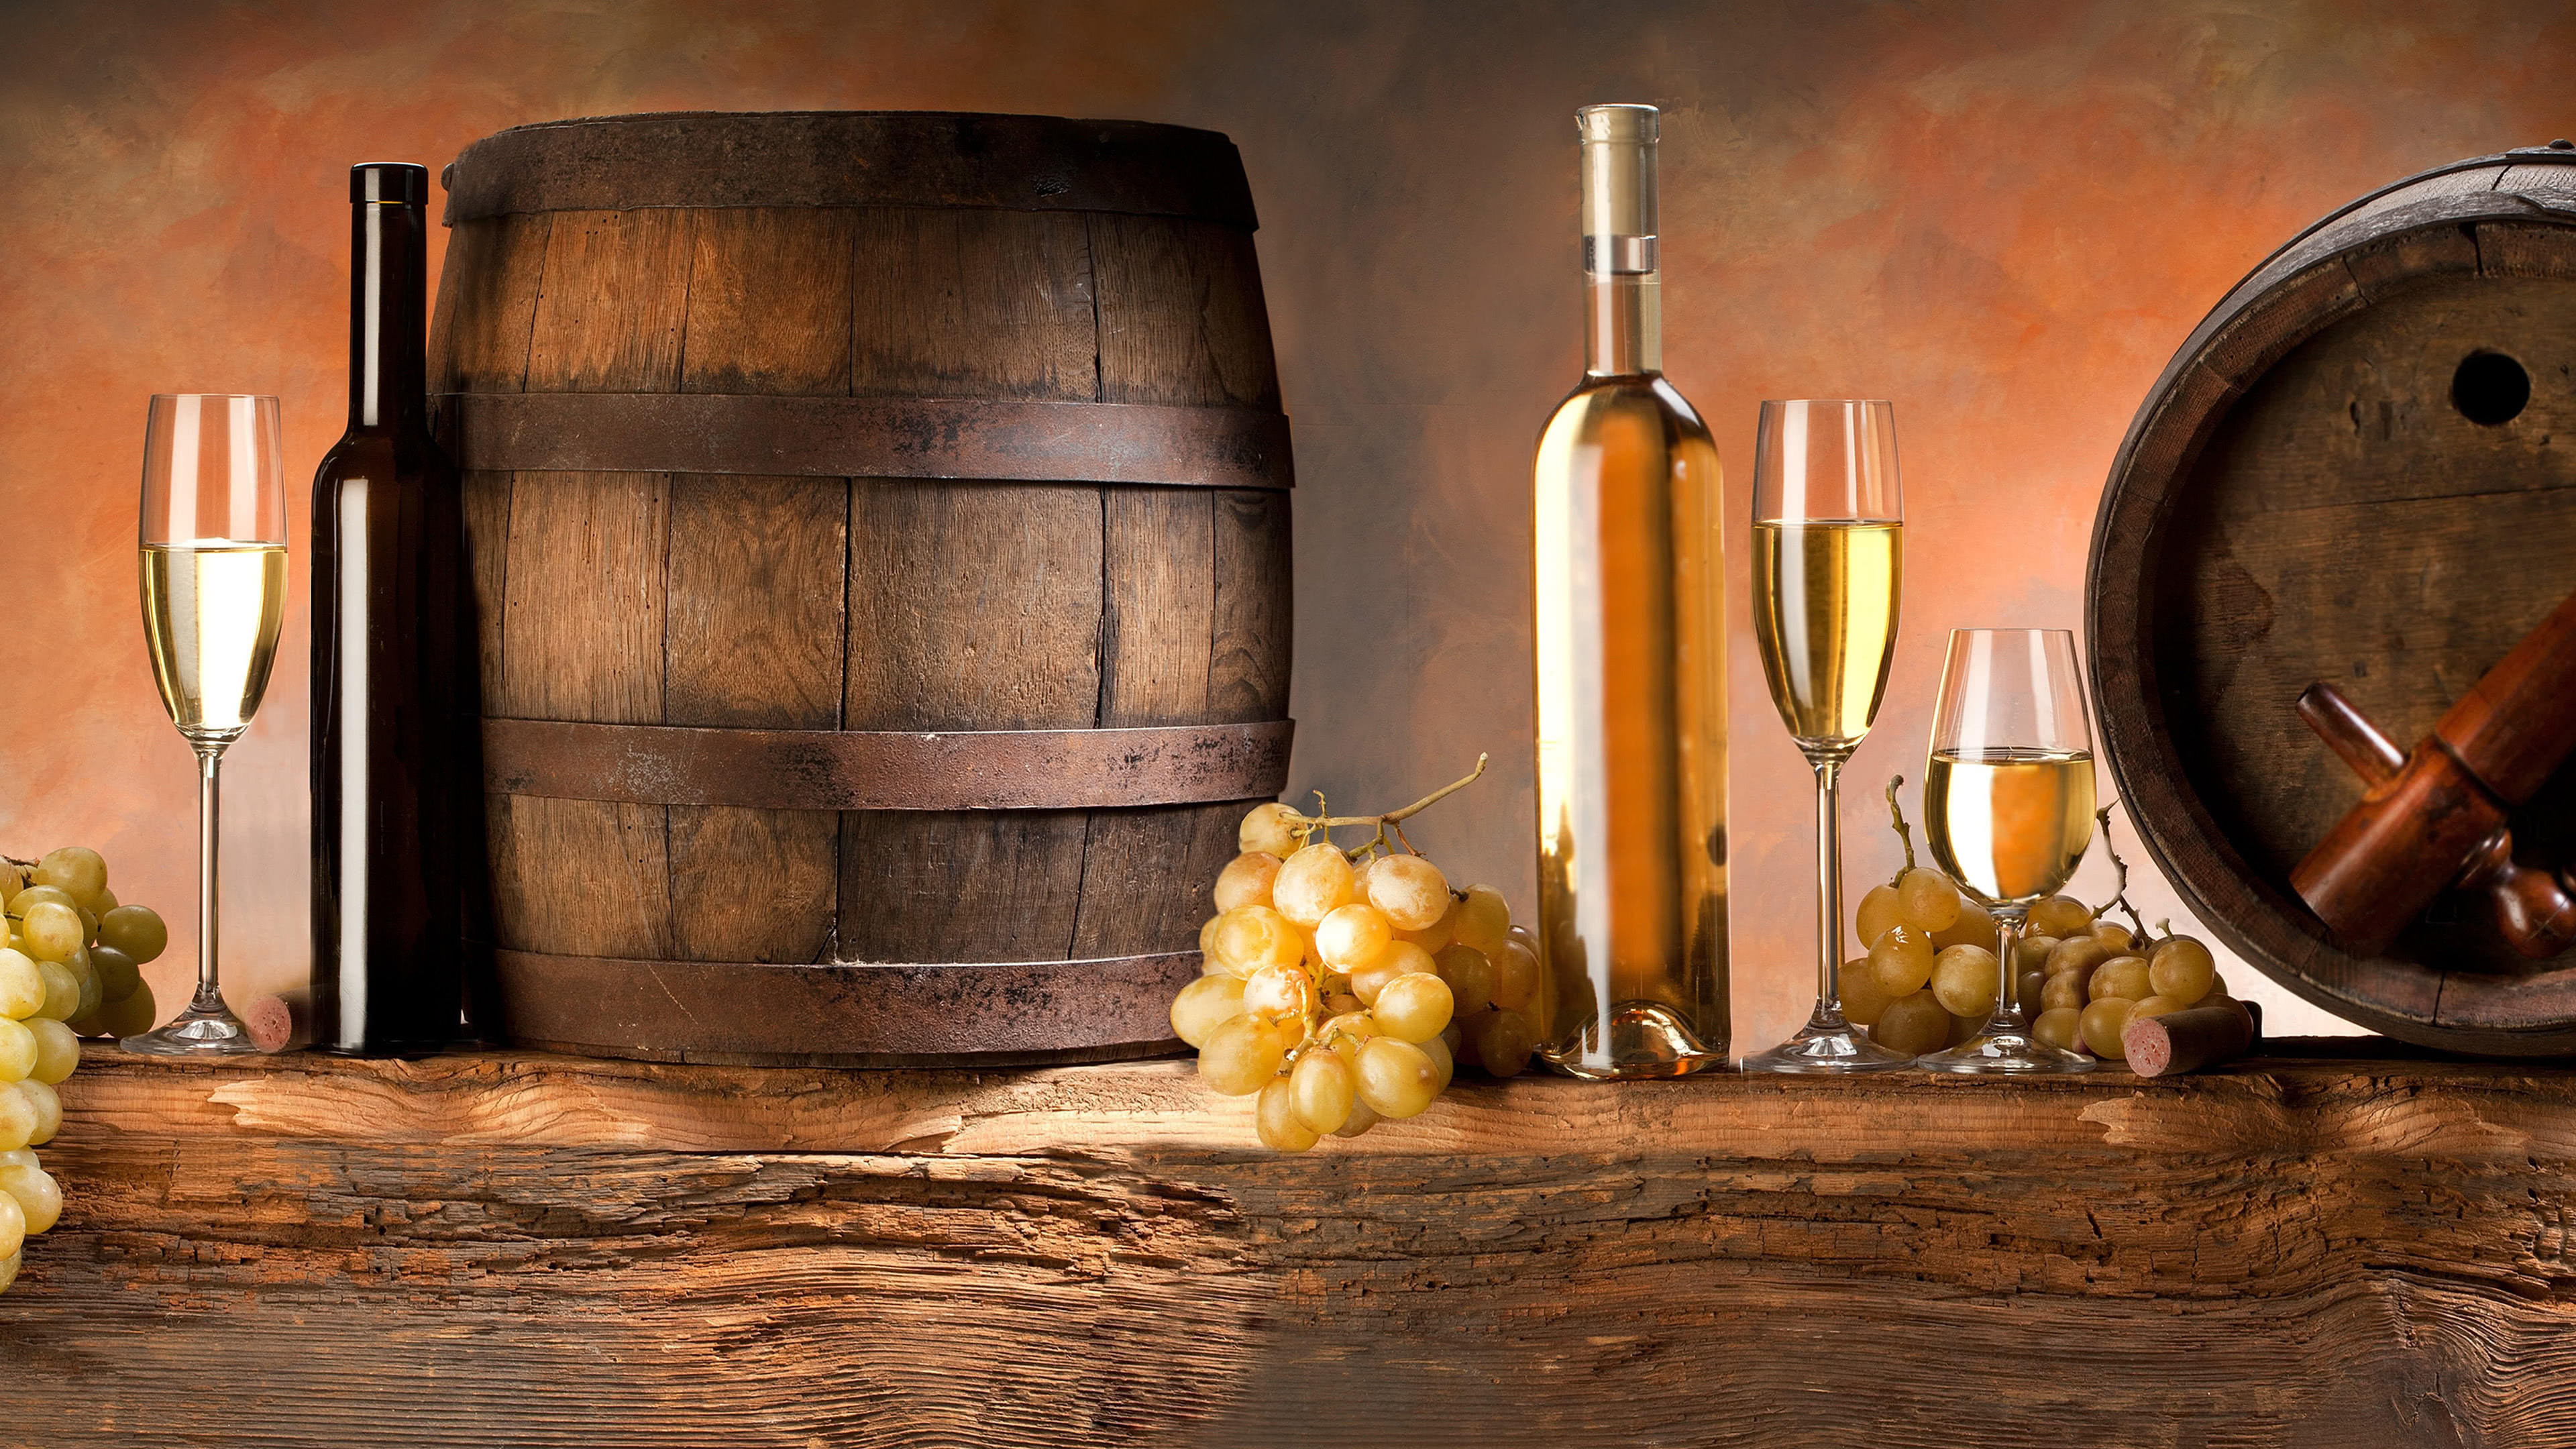 Grapes: Wine barrels, A type of fruit that grows in clusters of 15 to 300. 3840x2160 4K Wallpaper.